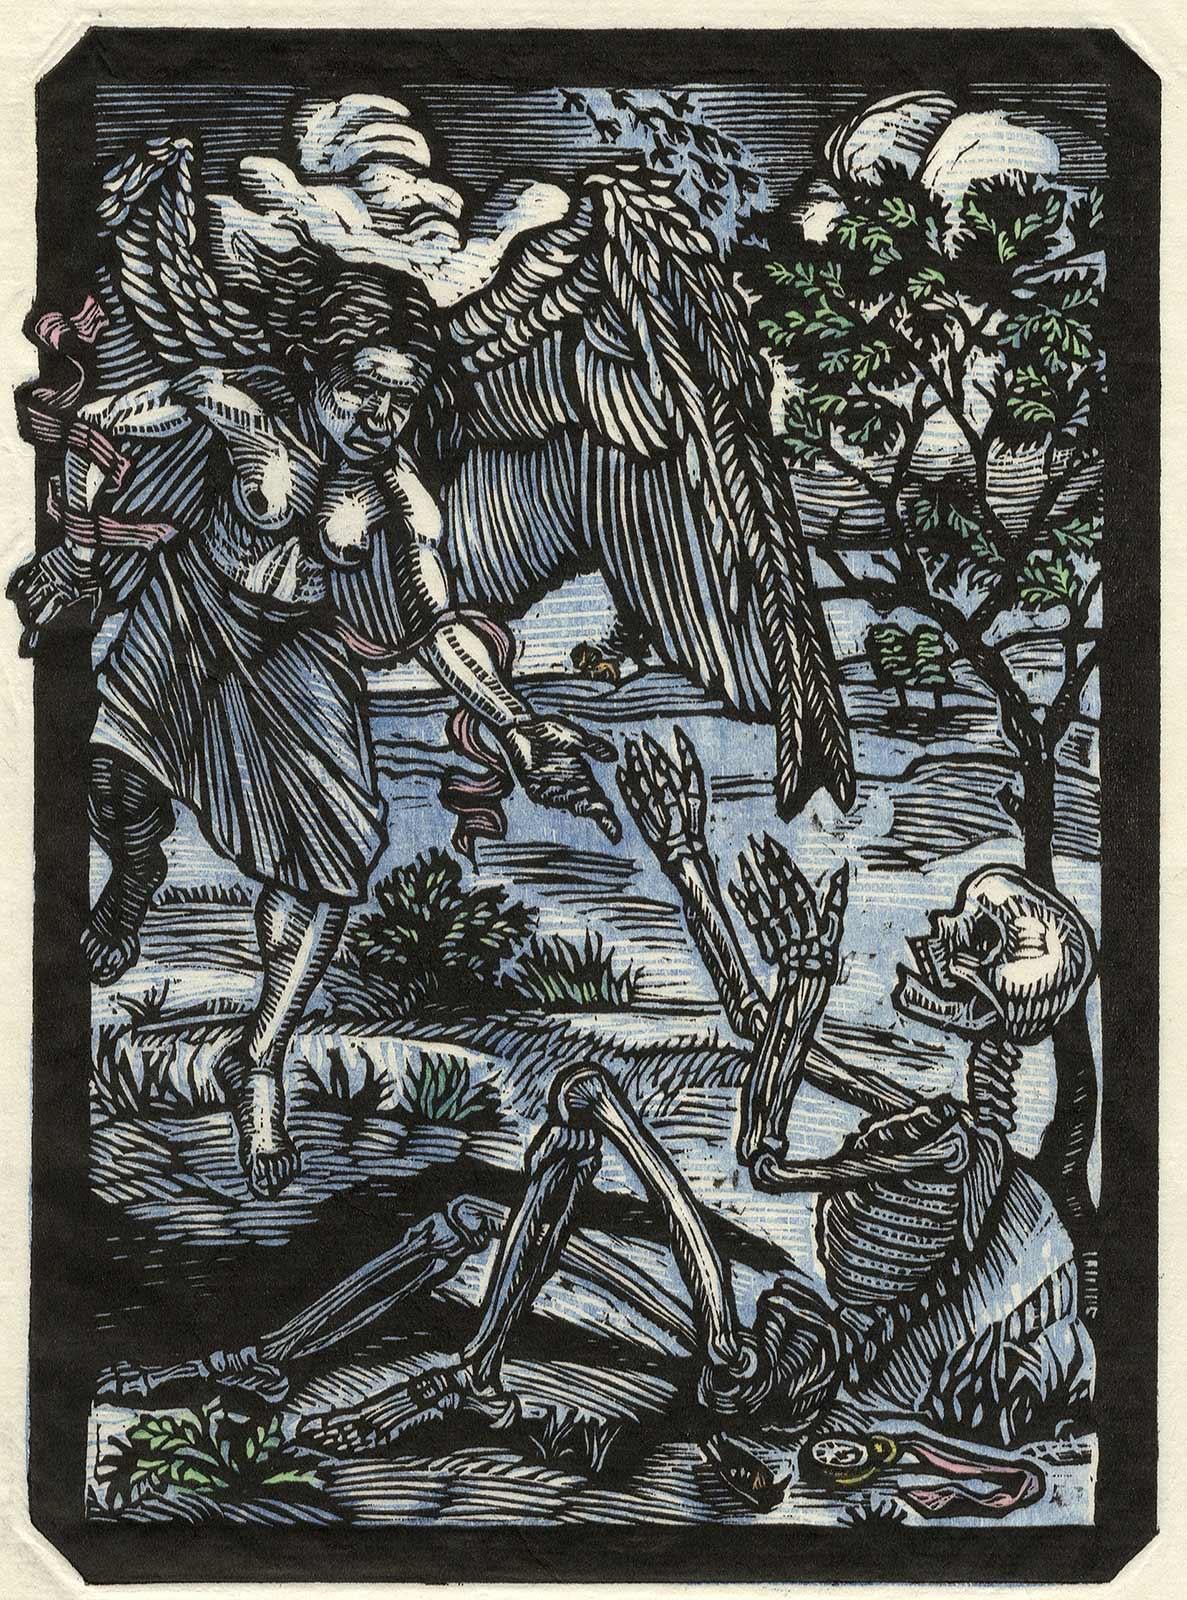 Donna Evans Landscape Print - Angel and Skeleton (the rescuing Angel appears to be female)